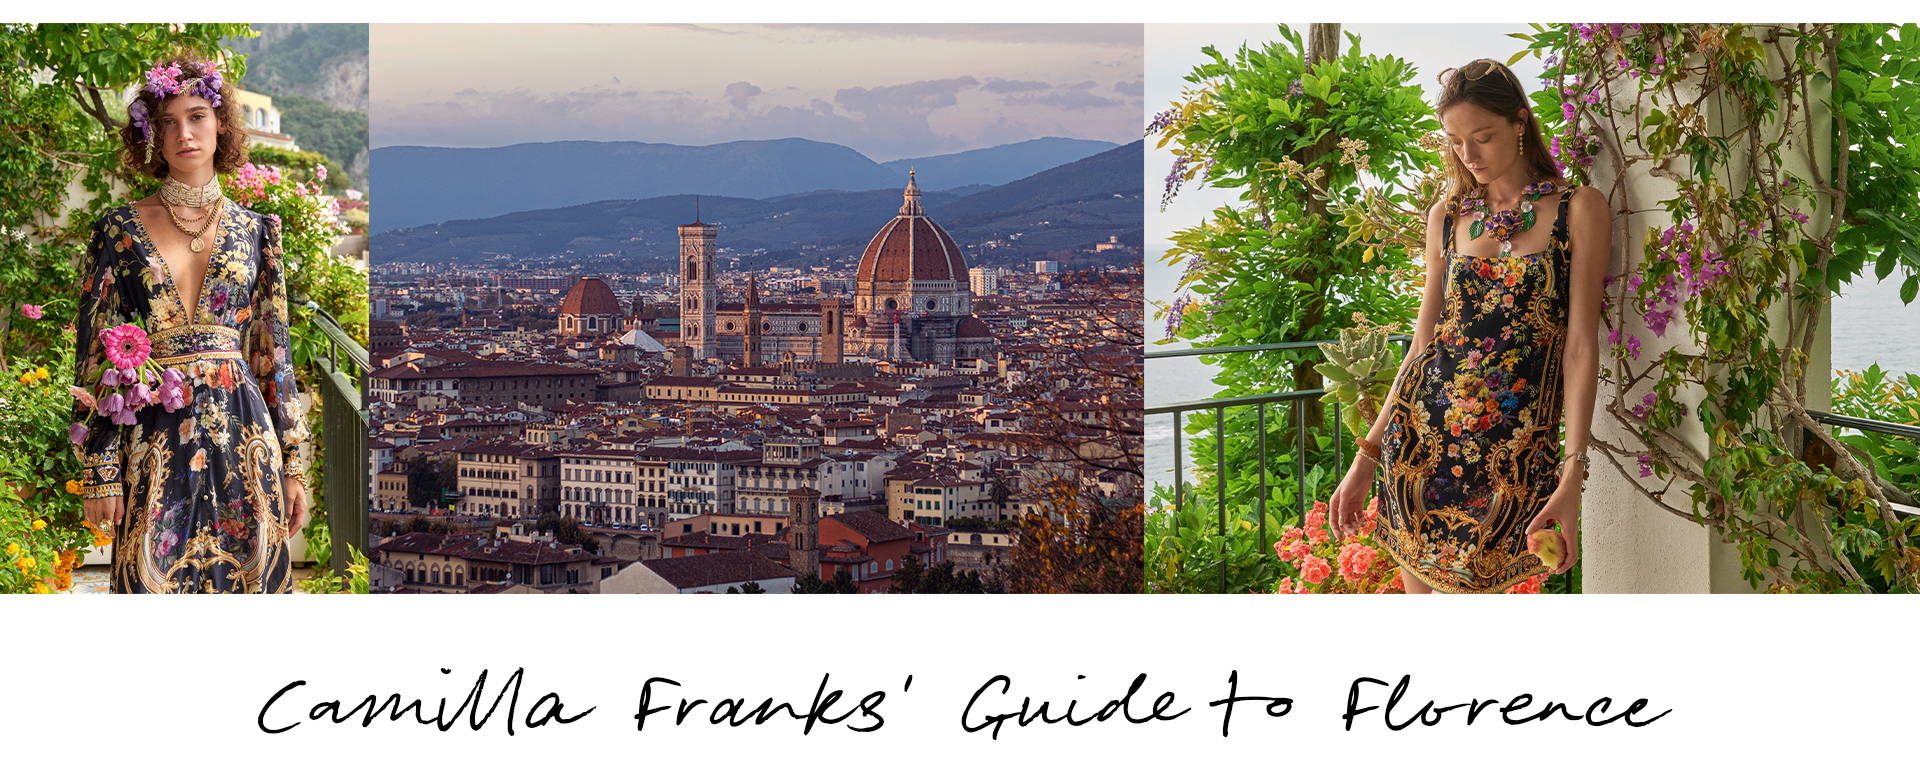 CAMILLA FRANKS' GUIDE TO FLORENCE